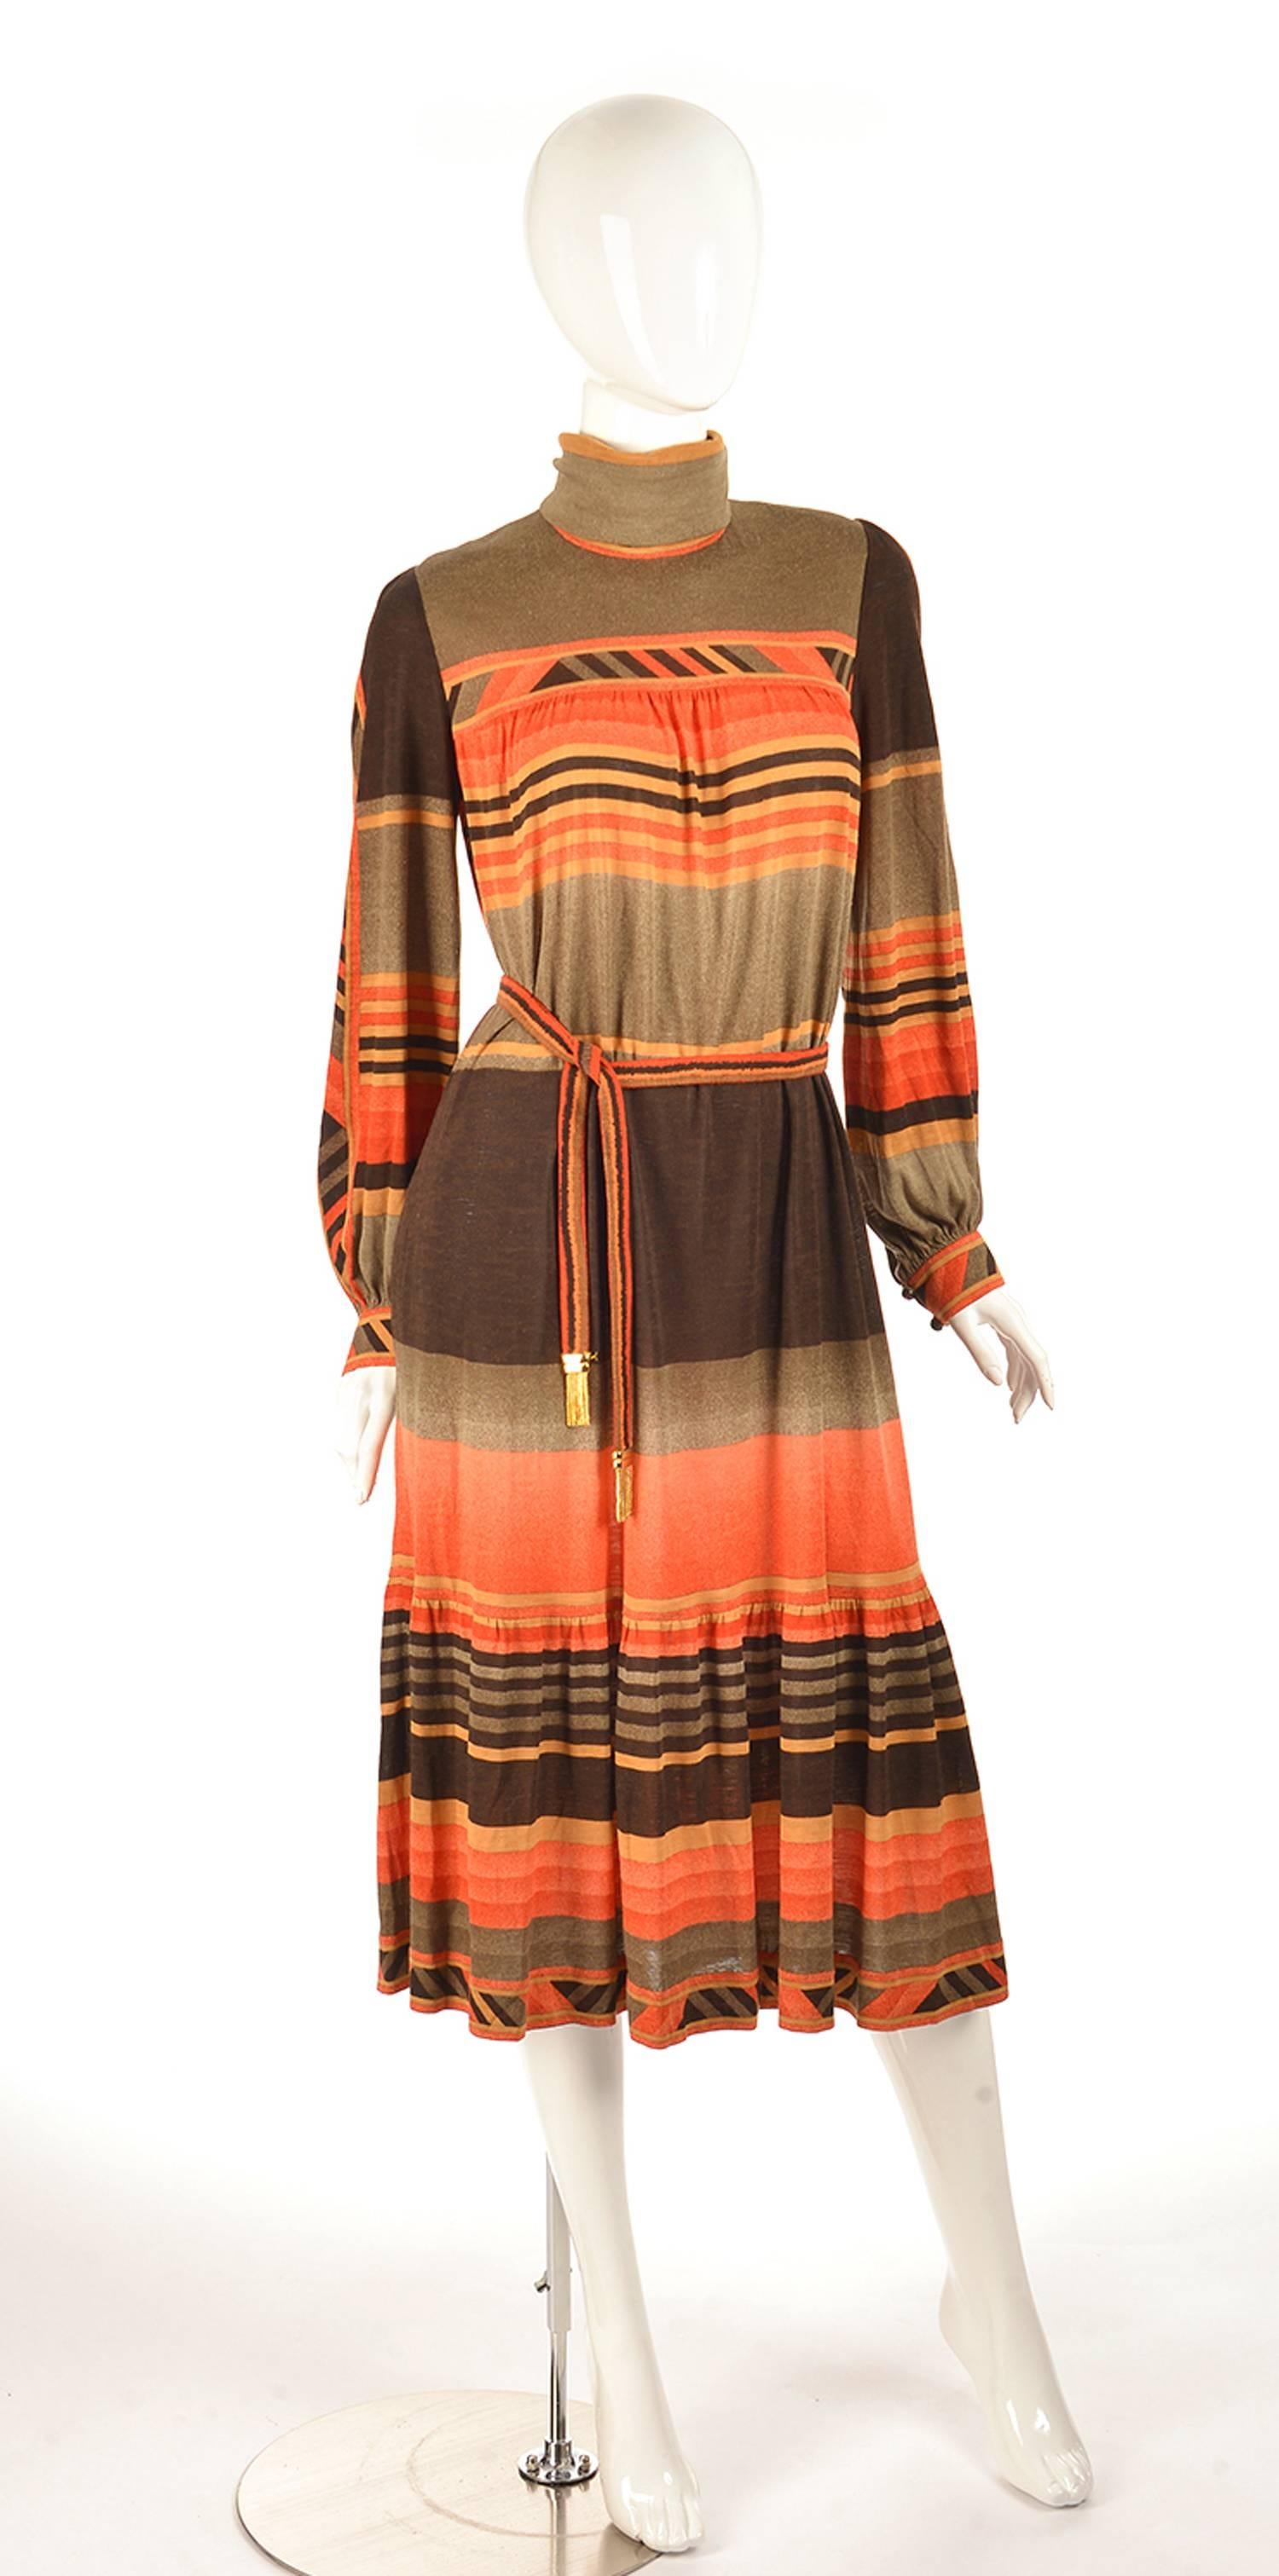 This light and breezy dress by Leonard Fashion Paris features a geometric stripe and triangle print. The dress has a turtleneck collar, cuff sleeves with brown and orange buttons, and a trumpet skirt. The belt has the same geometric print on it, as